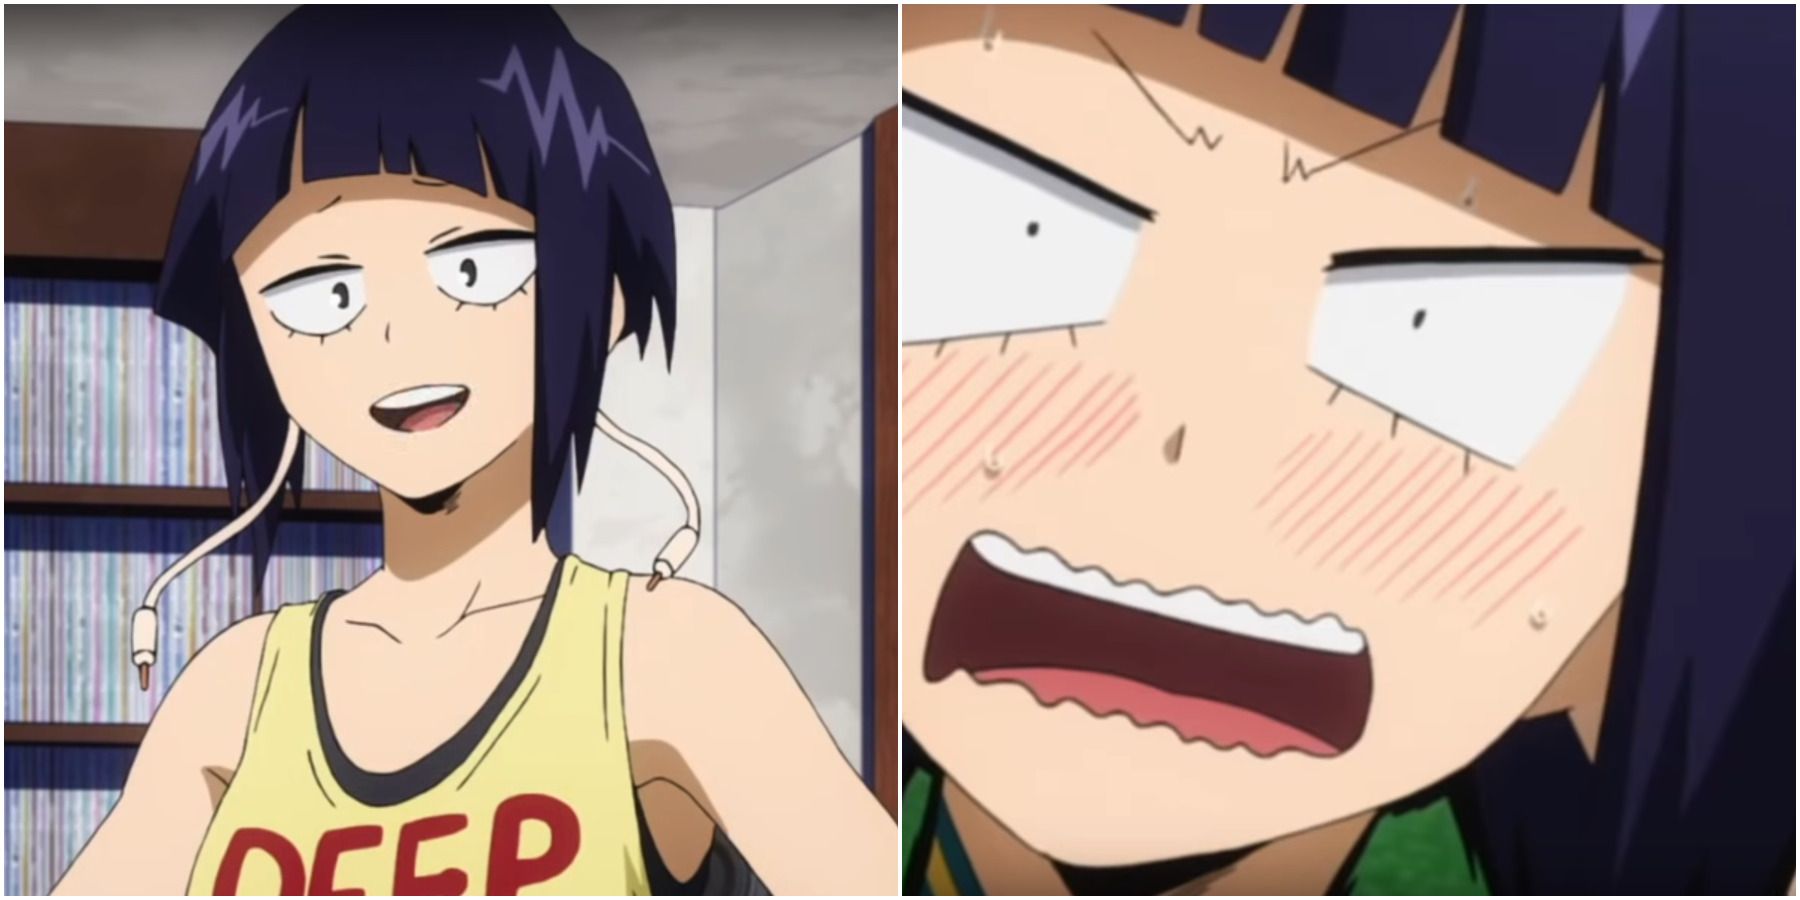 why i don't think its boob envy ok so we all know jiro has been